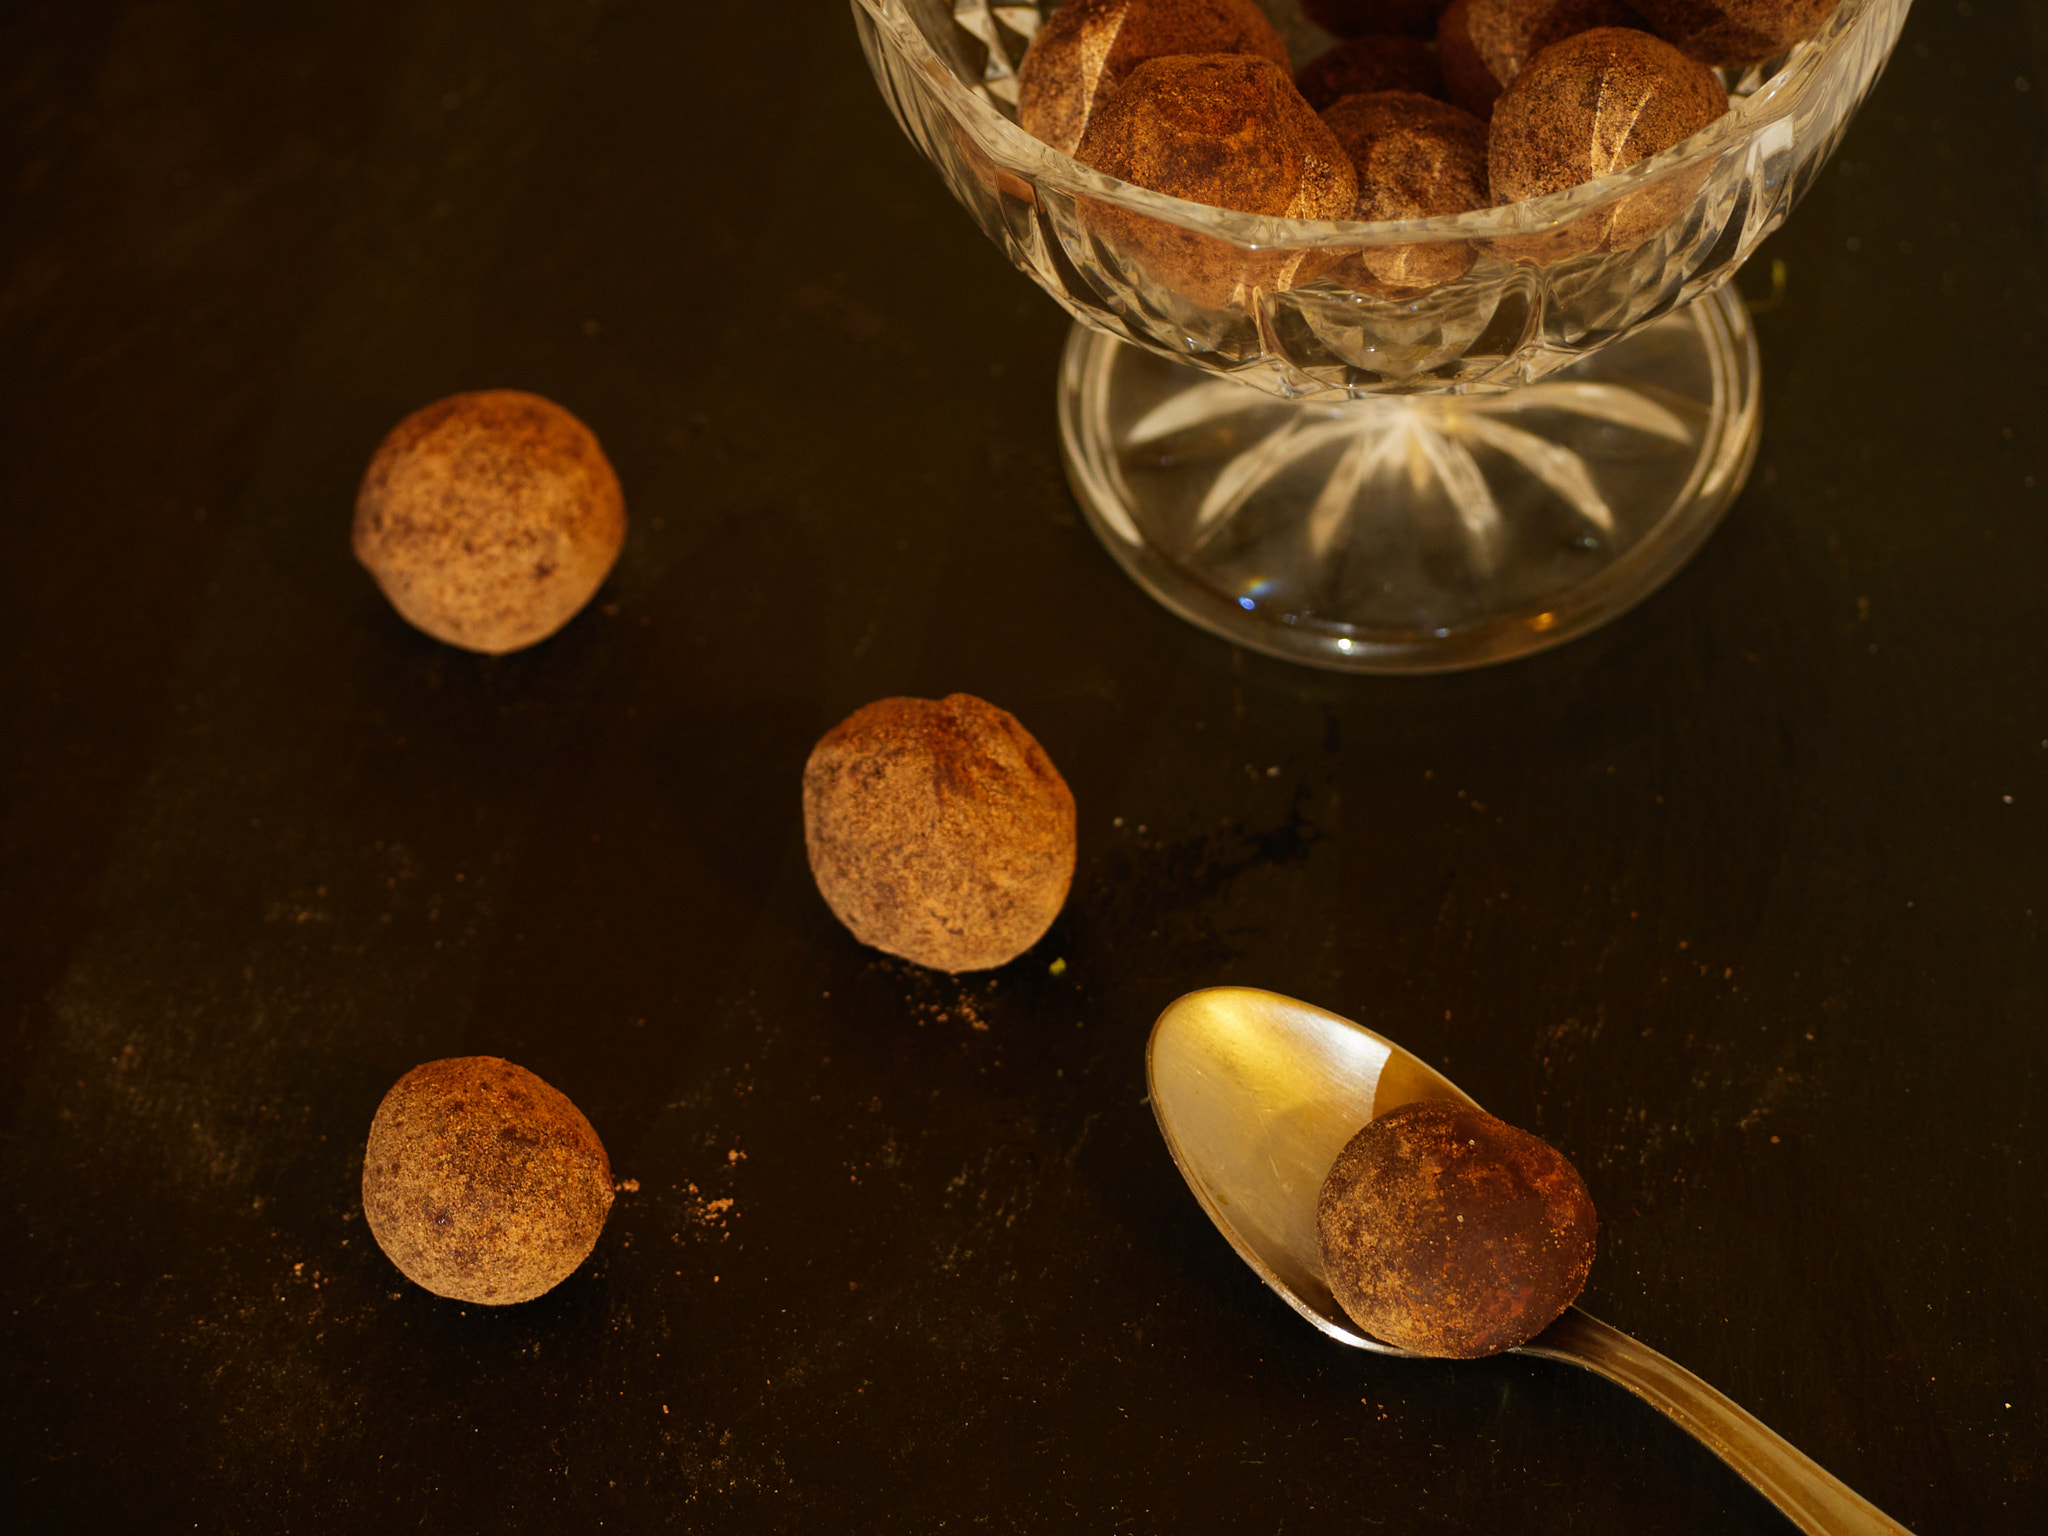 Several Chocolate Truffles with cocoa powder with a spoon and a glass